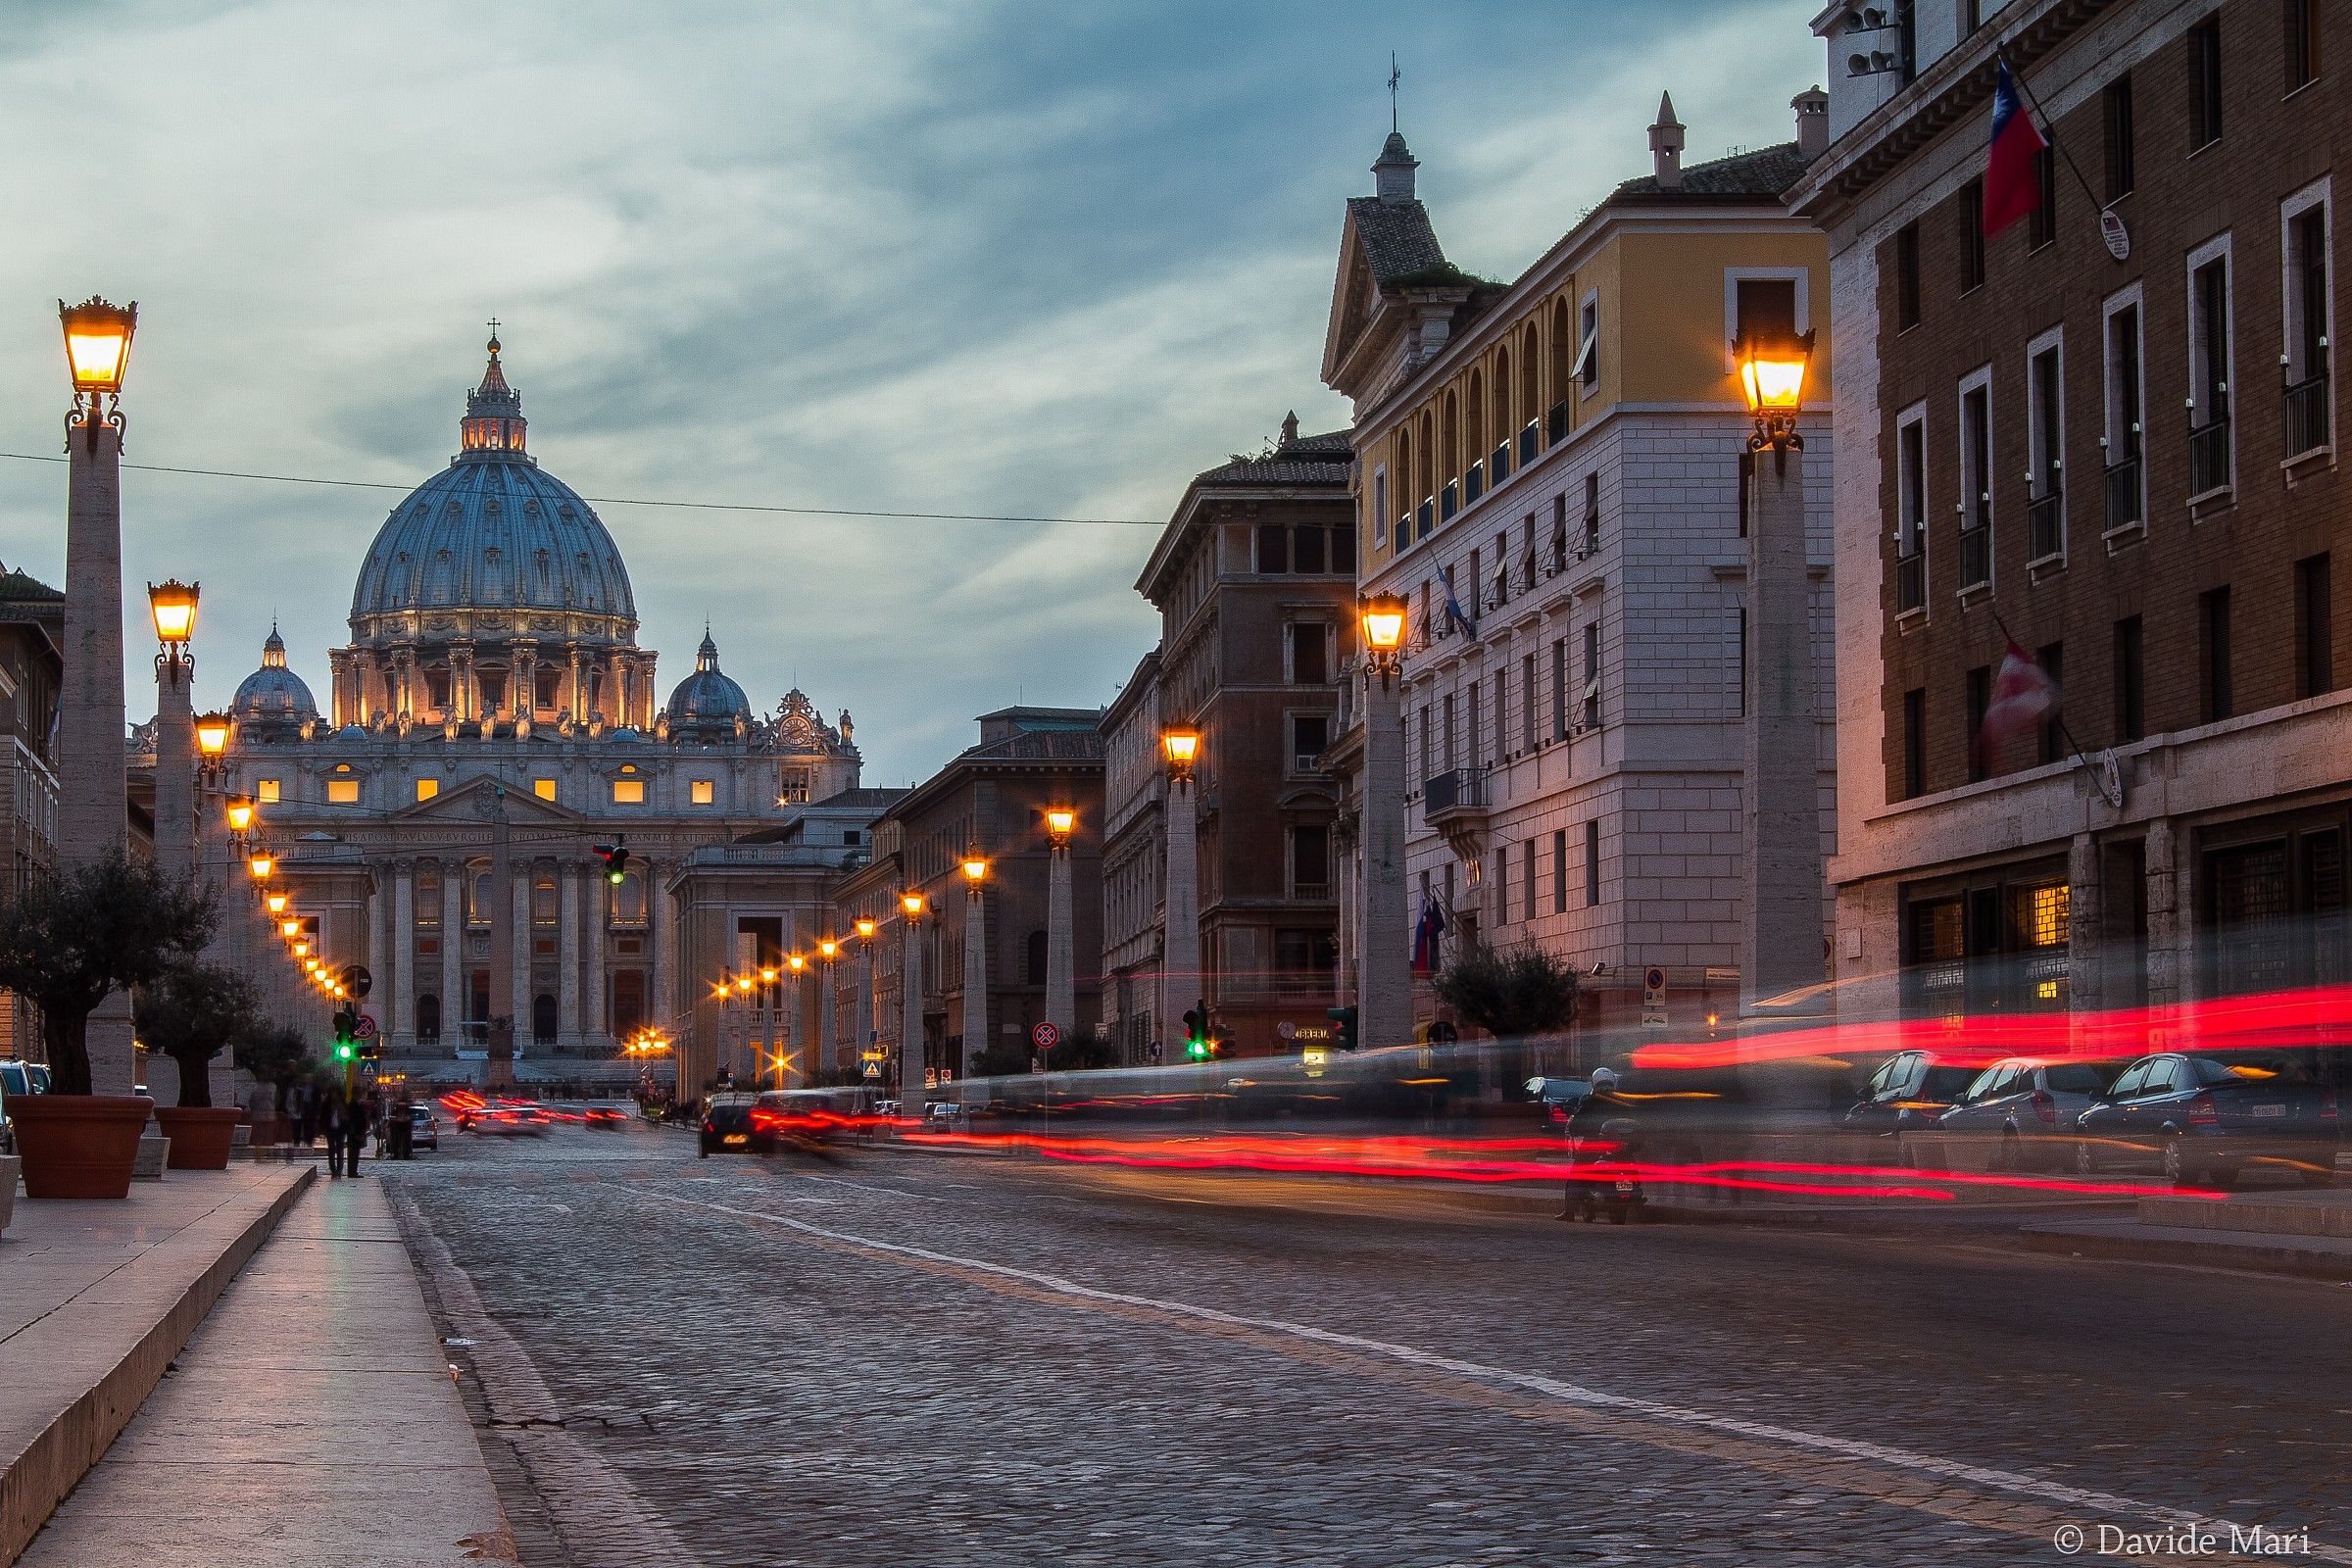 View of St. Peter's at sunset...